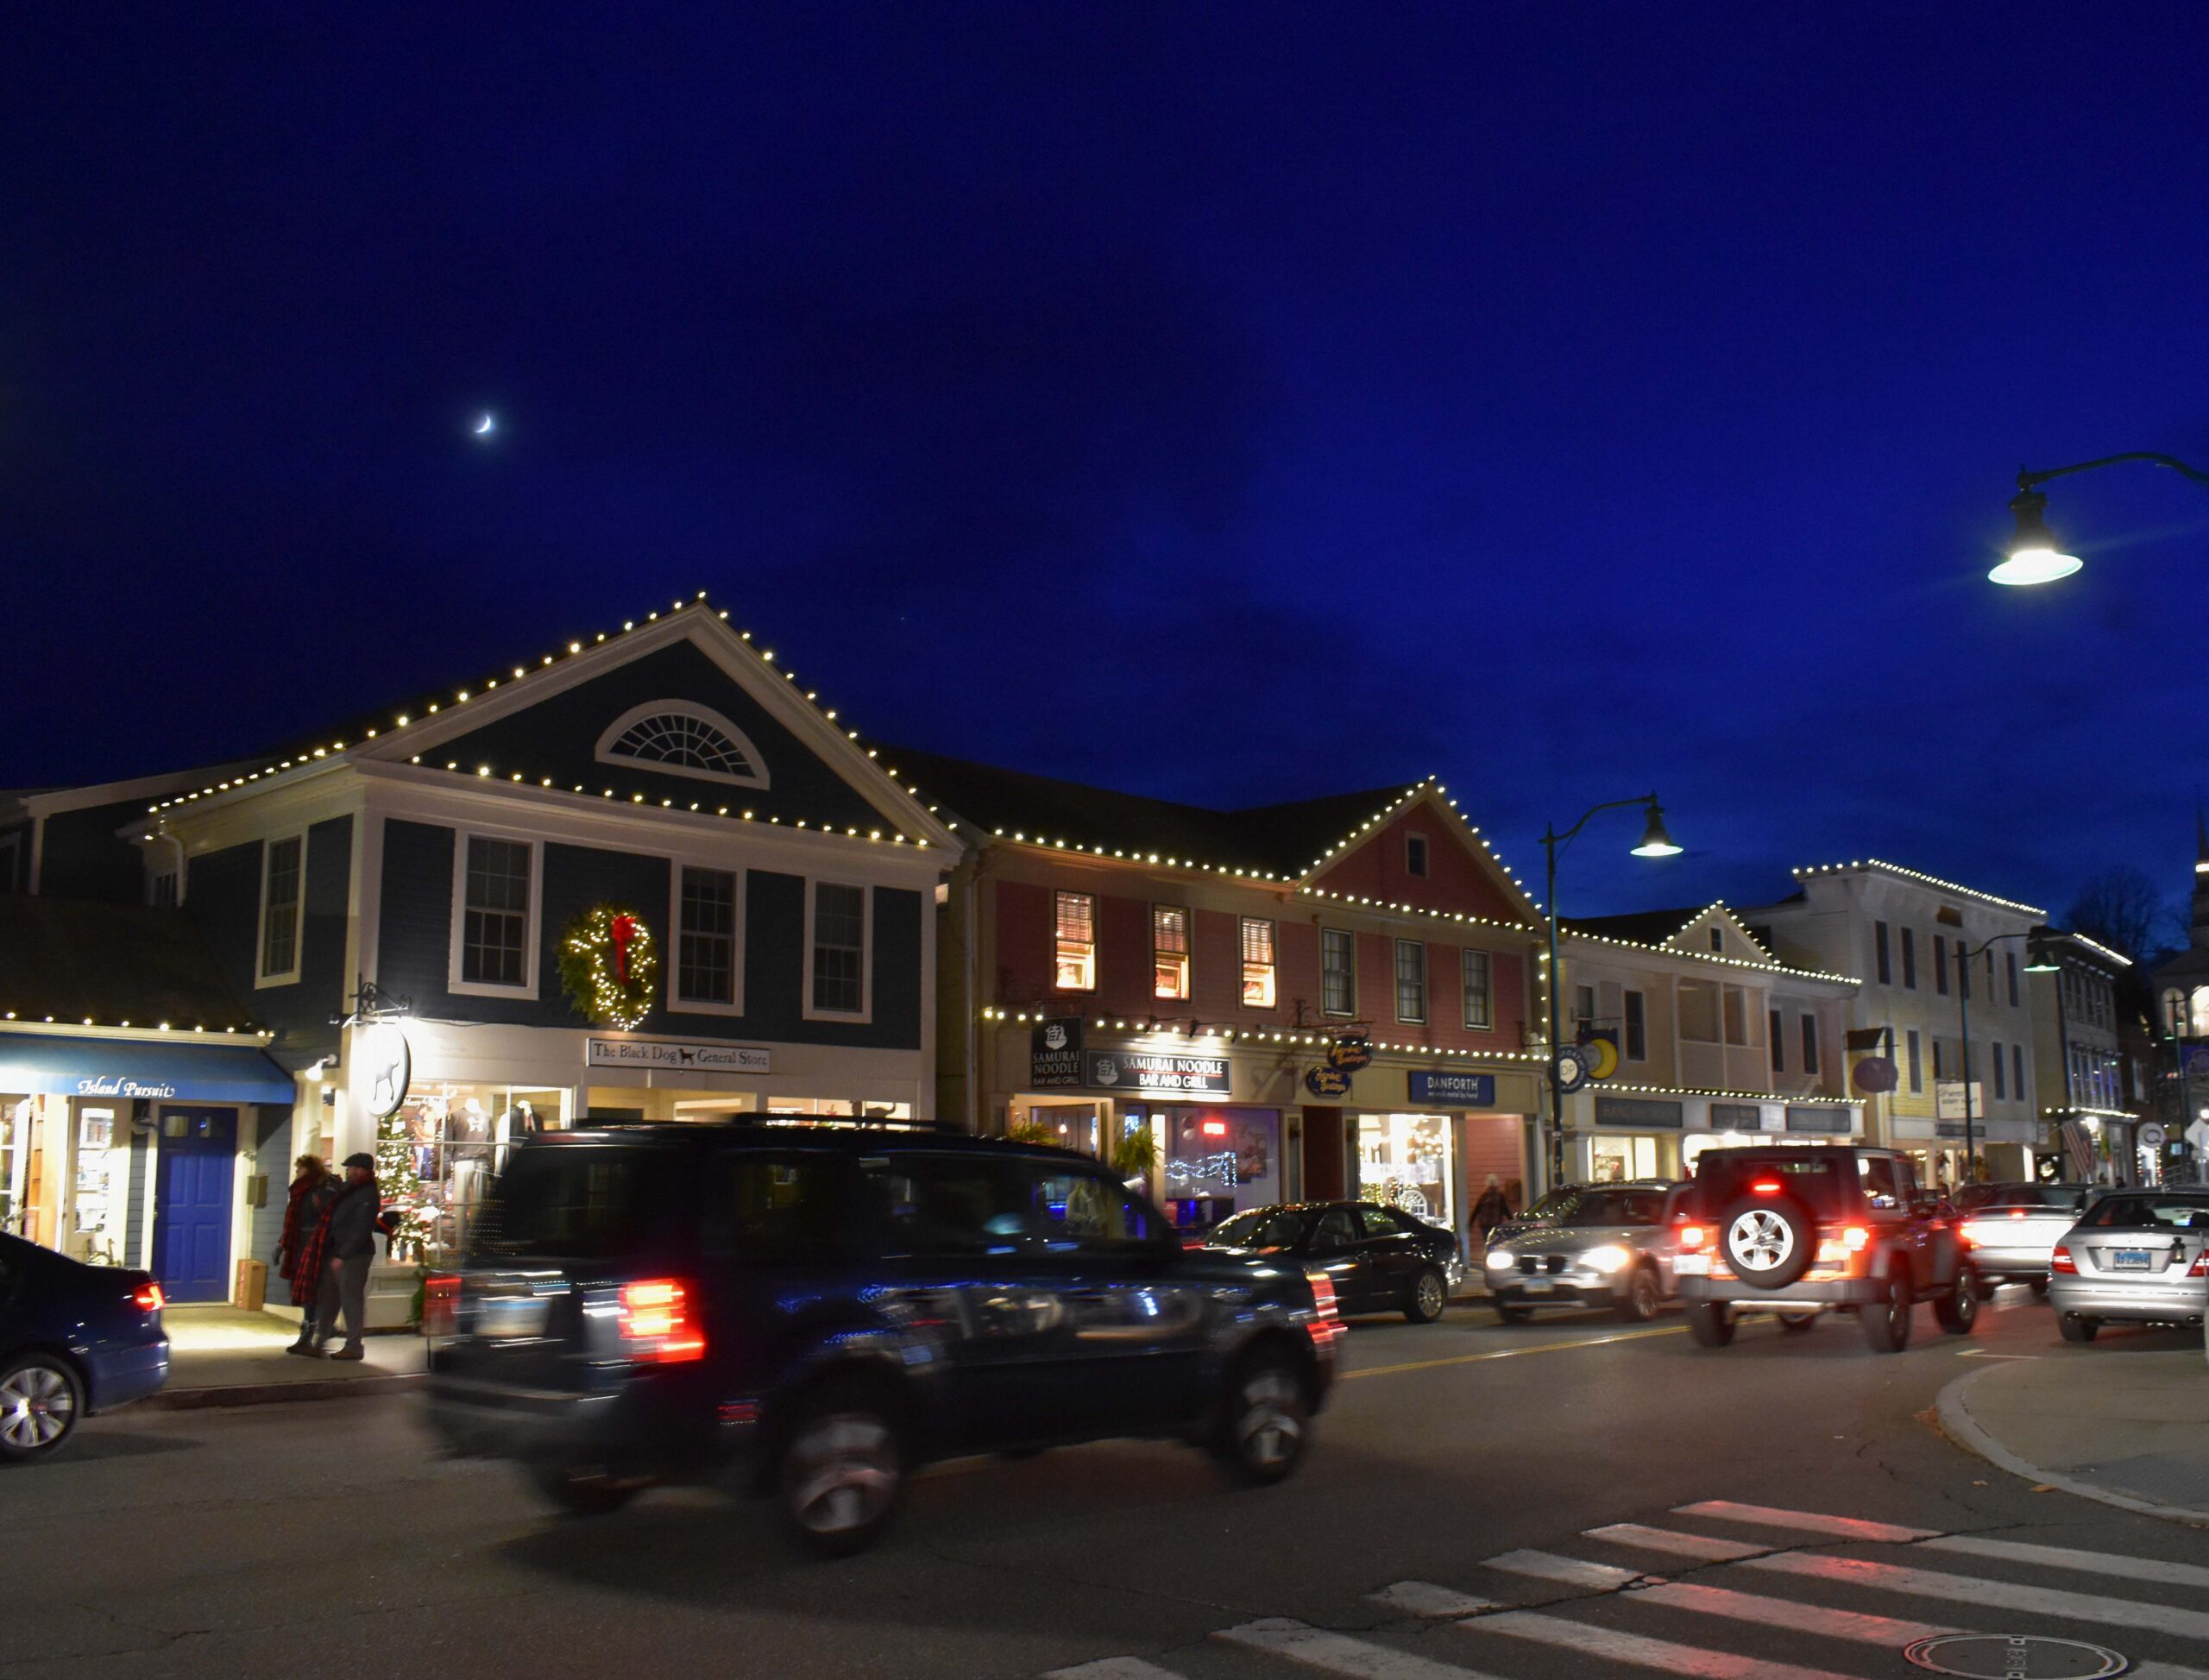 Cars drive down Main Street in Mystic on a Winter's evening while the buildings are decorated for the Holliday. 